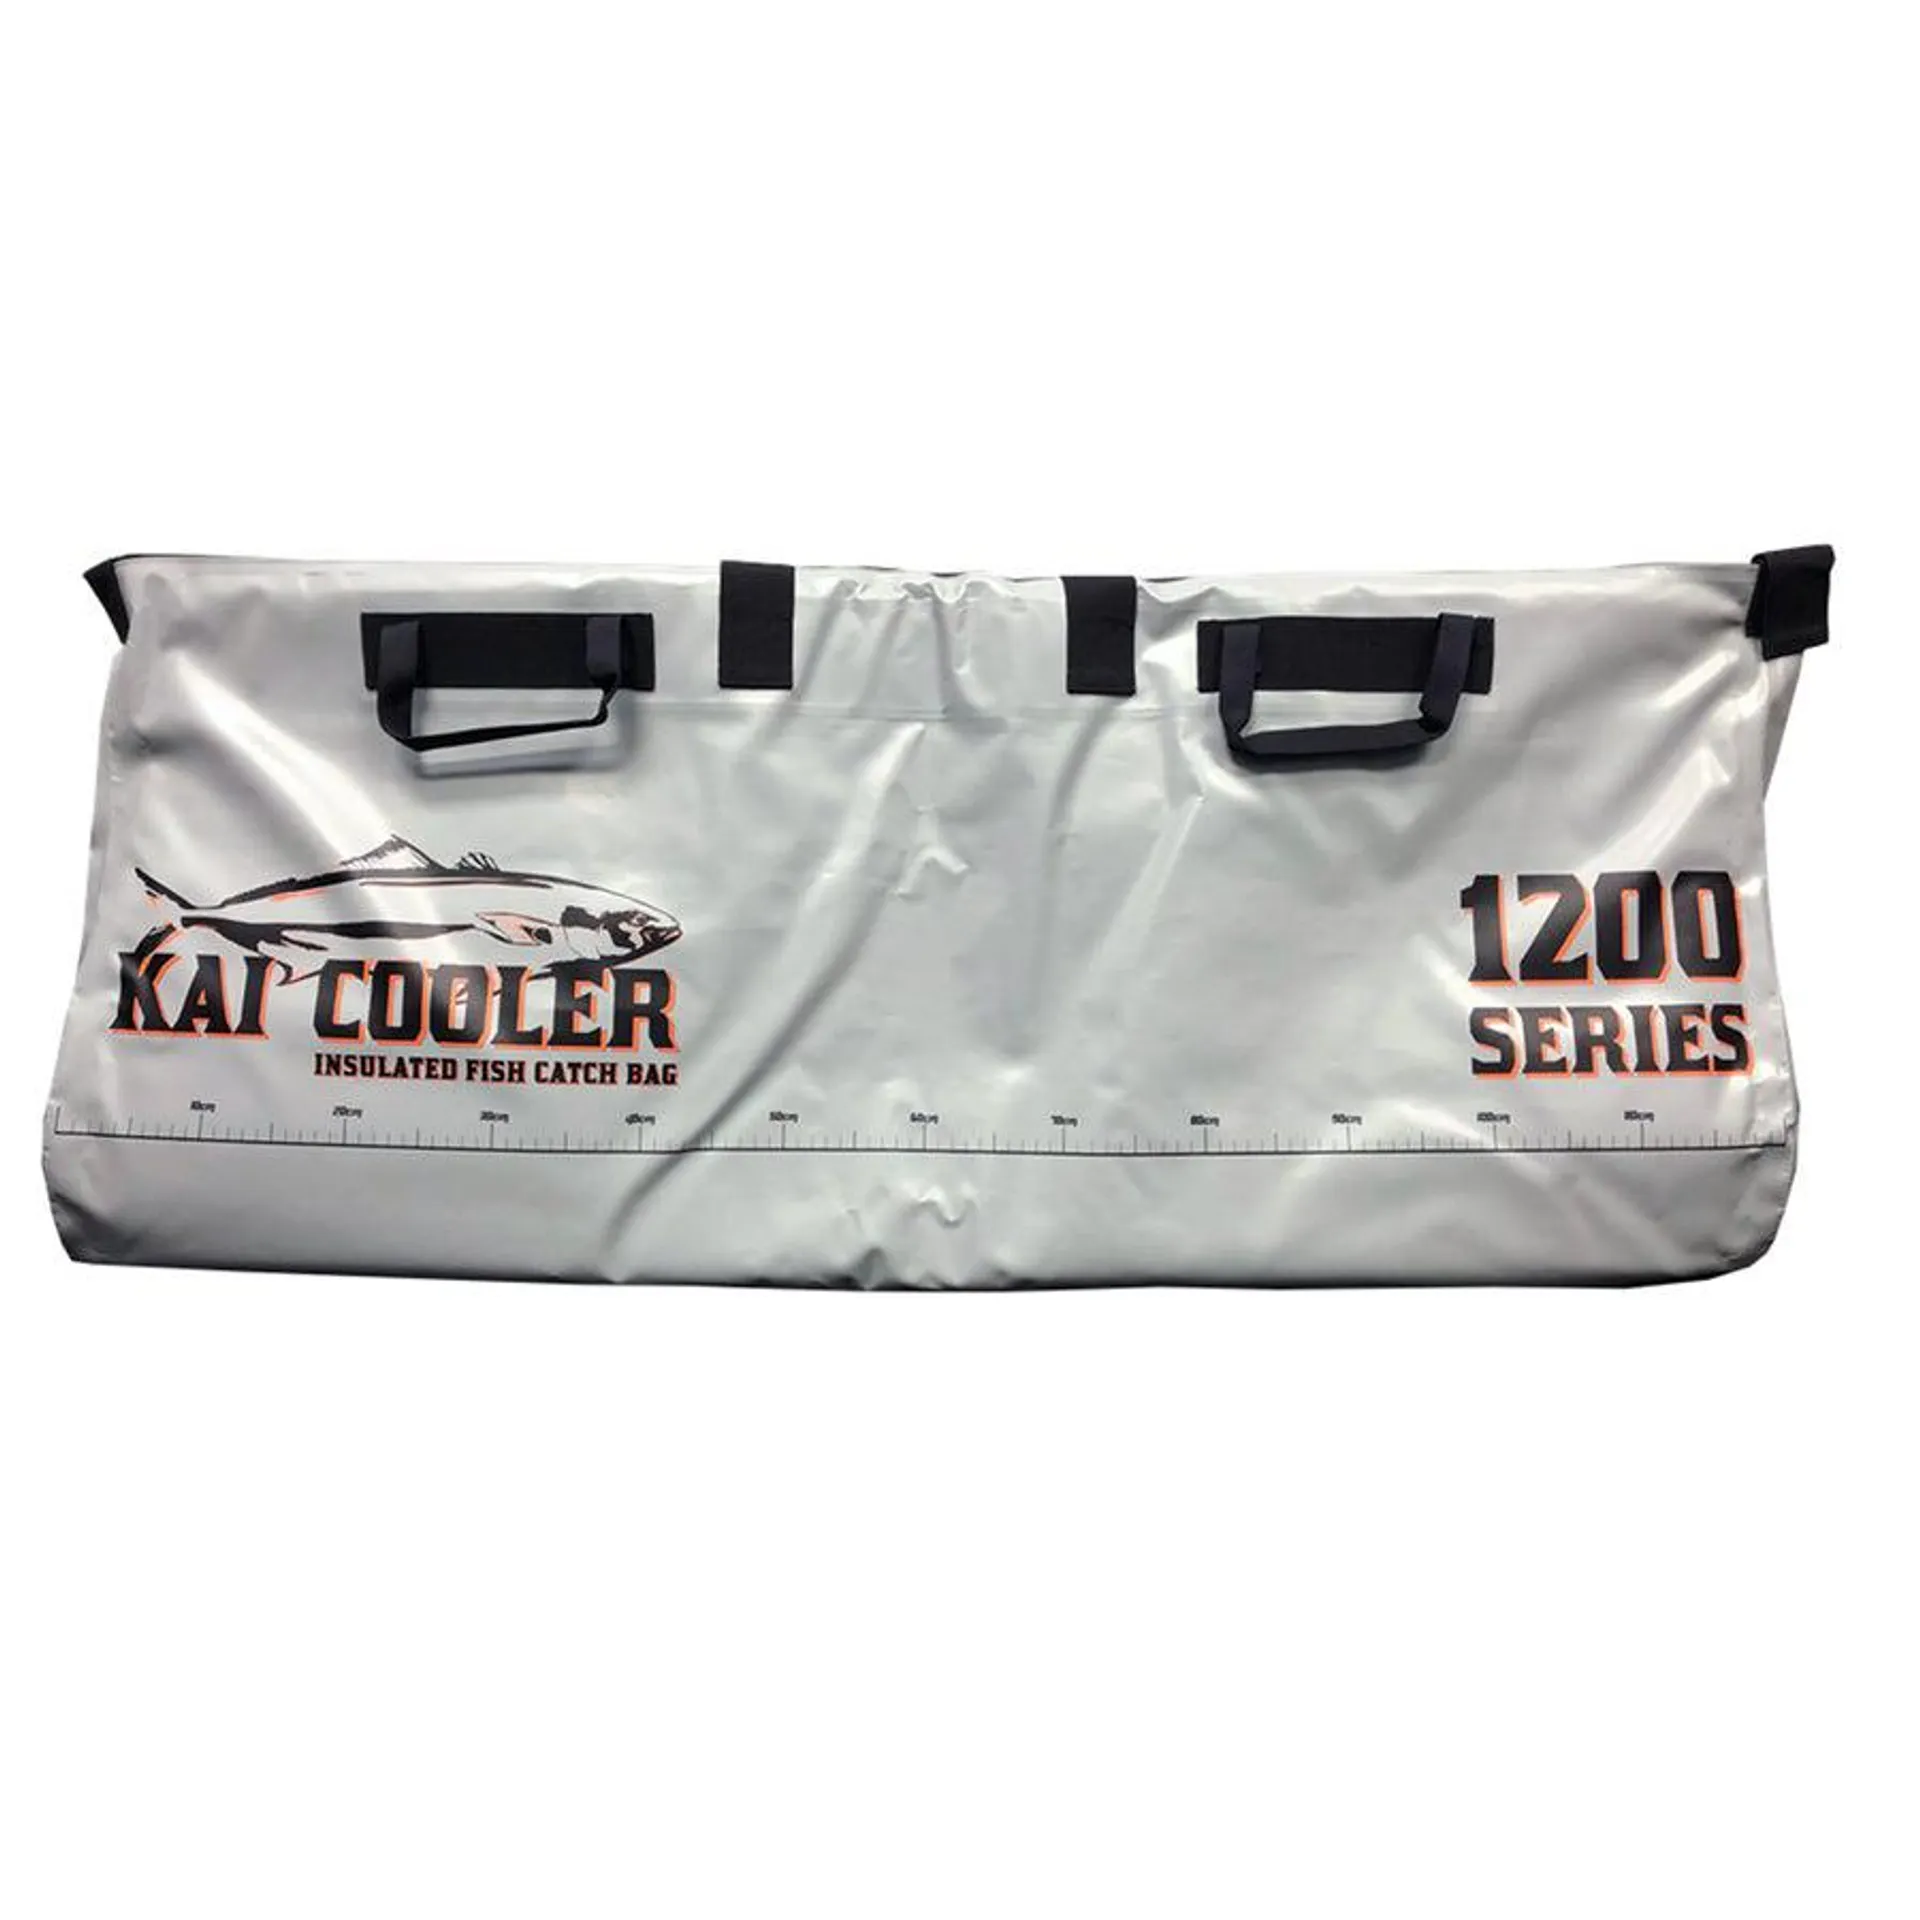 Hutchwilco Kai Cooler Catch Bag 1200 Series Large